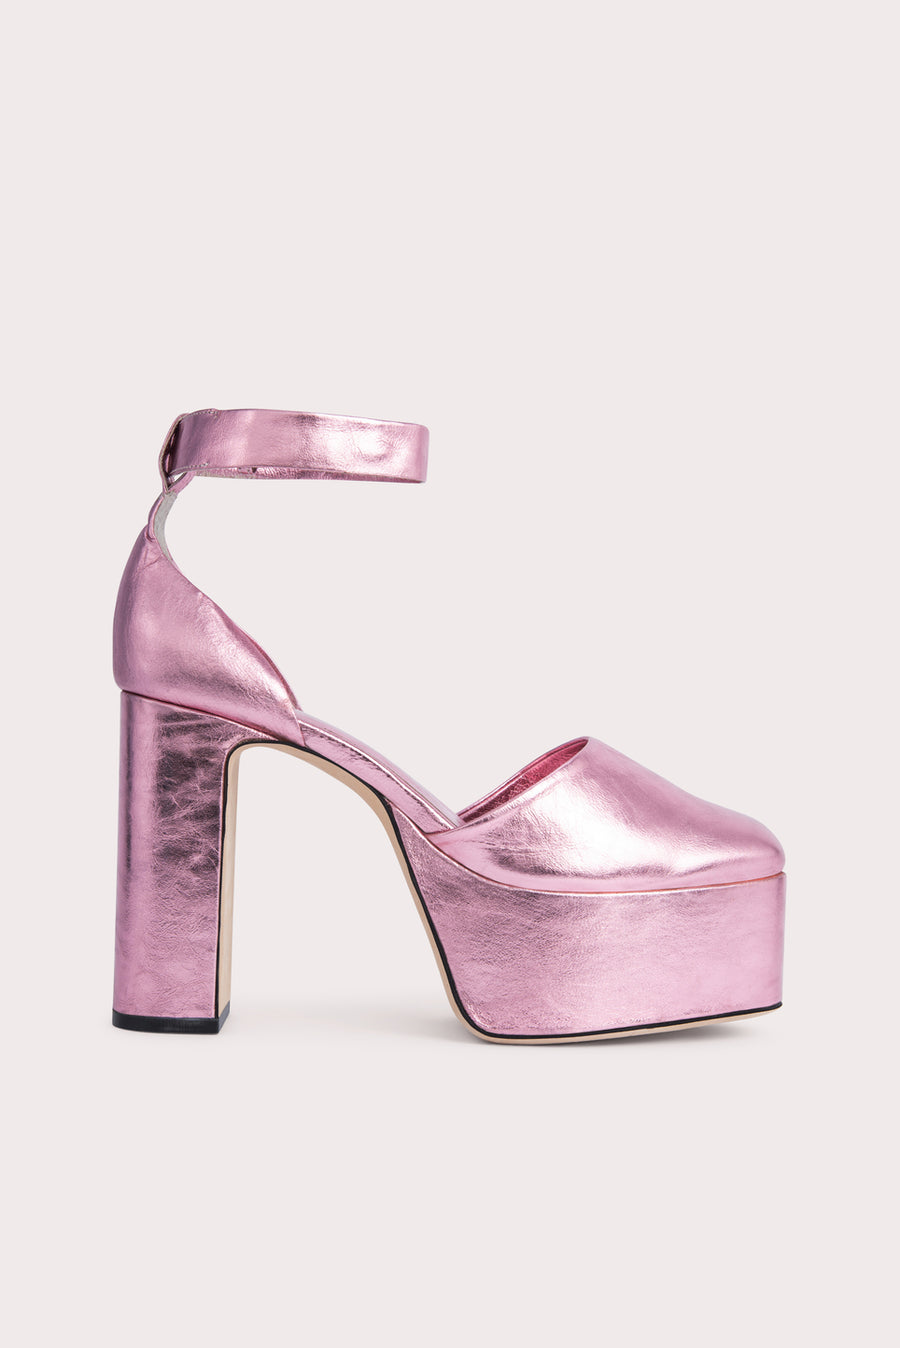 The 'Barb' platform pump. Standing tall on a 12cm block heel in metallic leather. Rounded toe, adjustable ankle strap. 